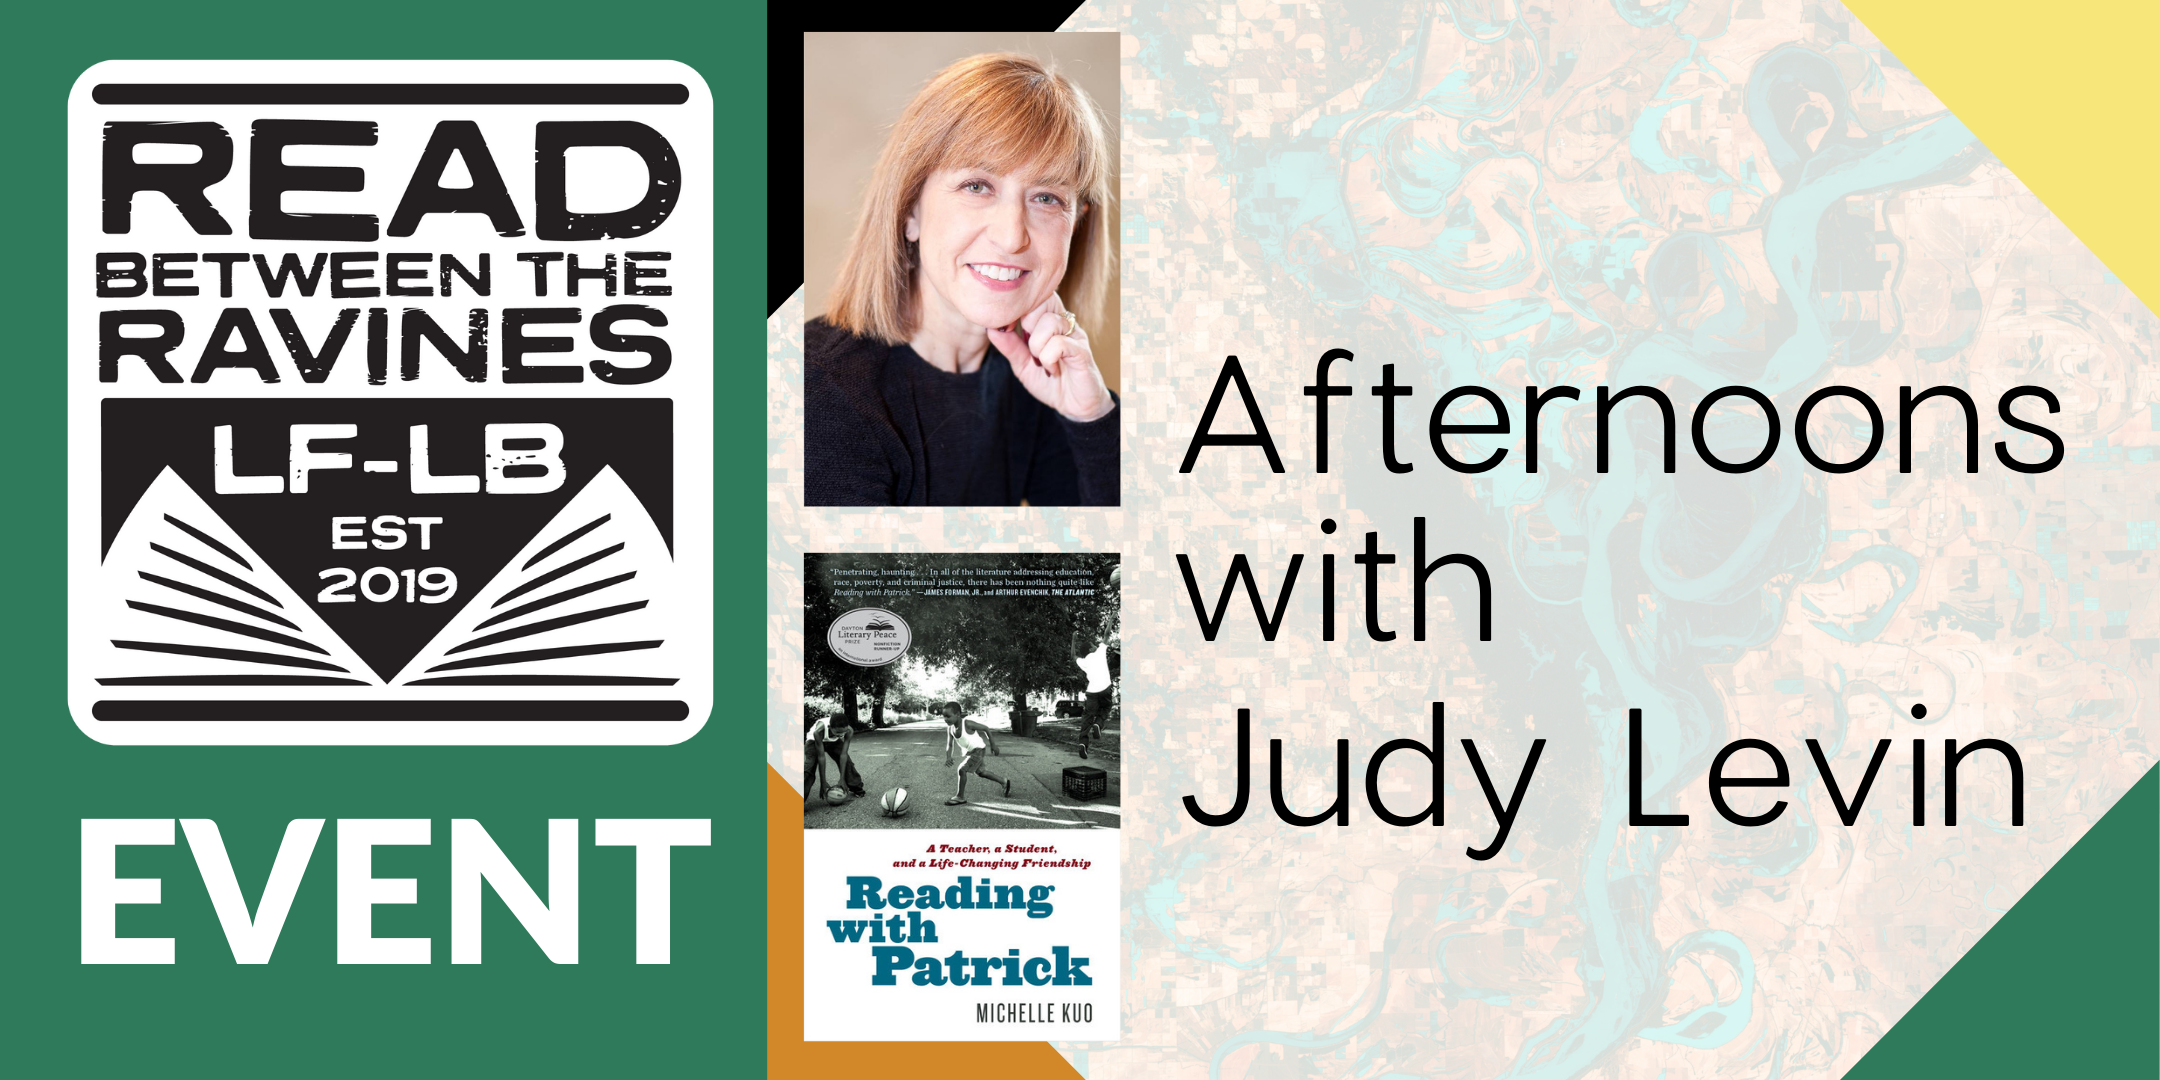 Read Between the Ravines Event: Afternoons with Judy Levin Discussion on "Reading with Patrick" image